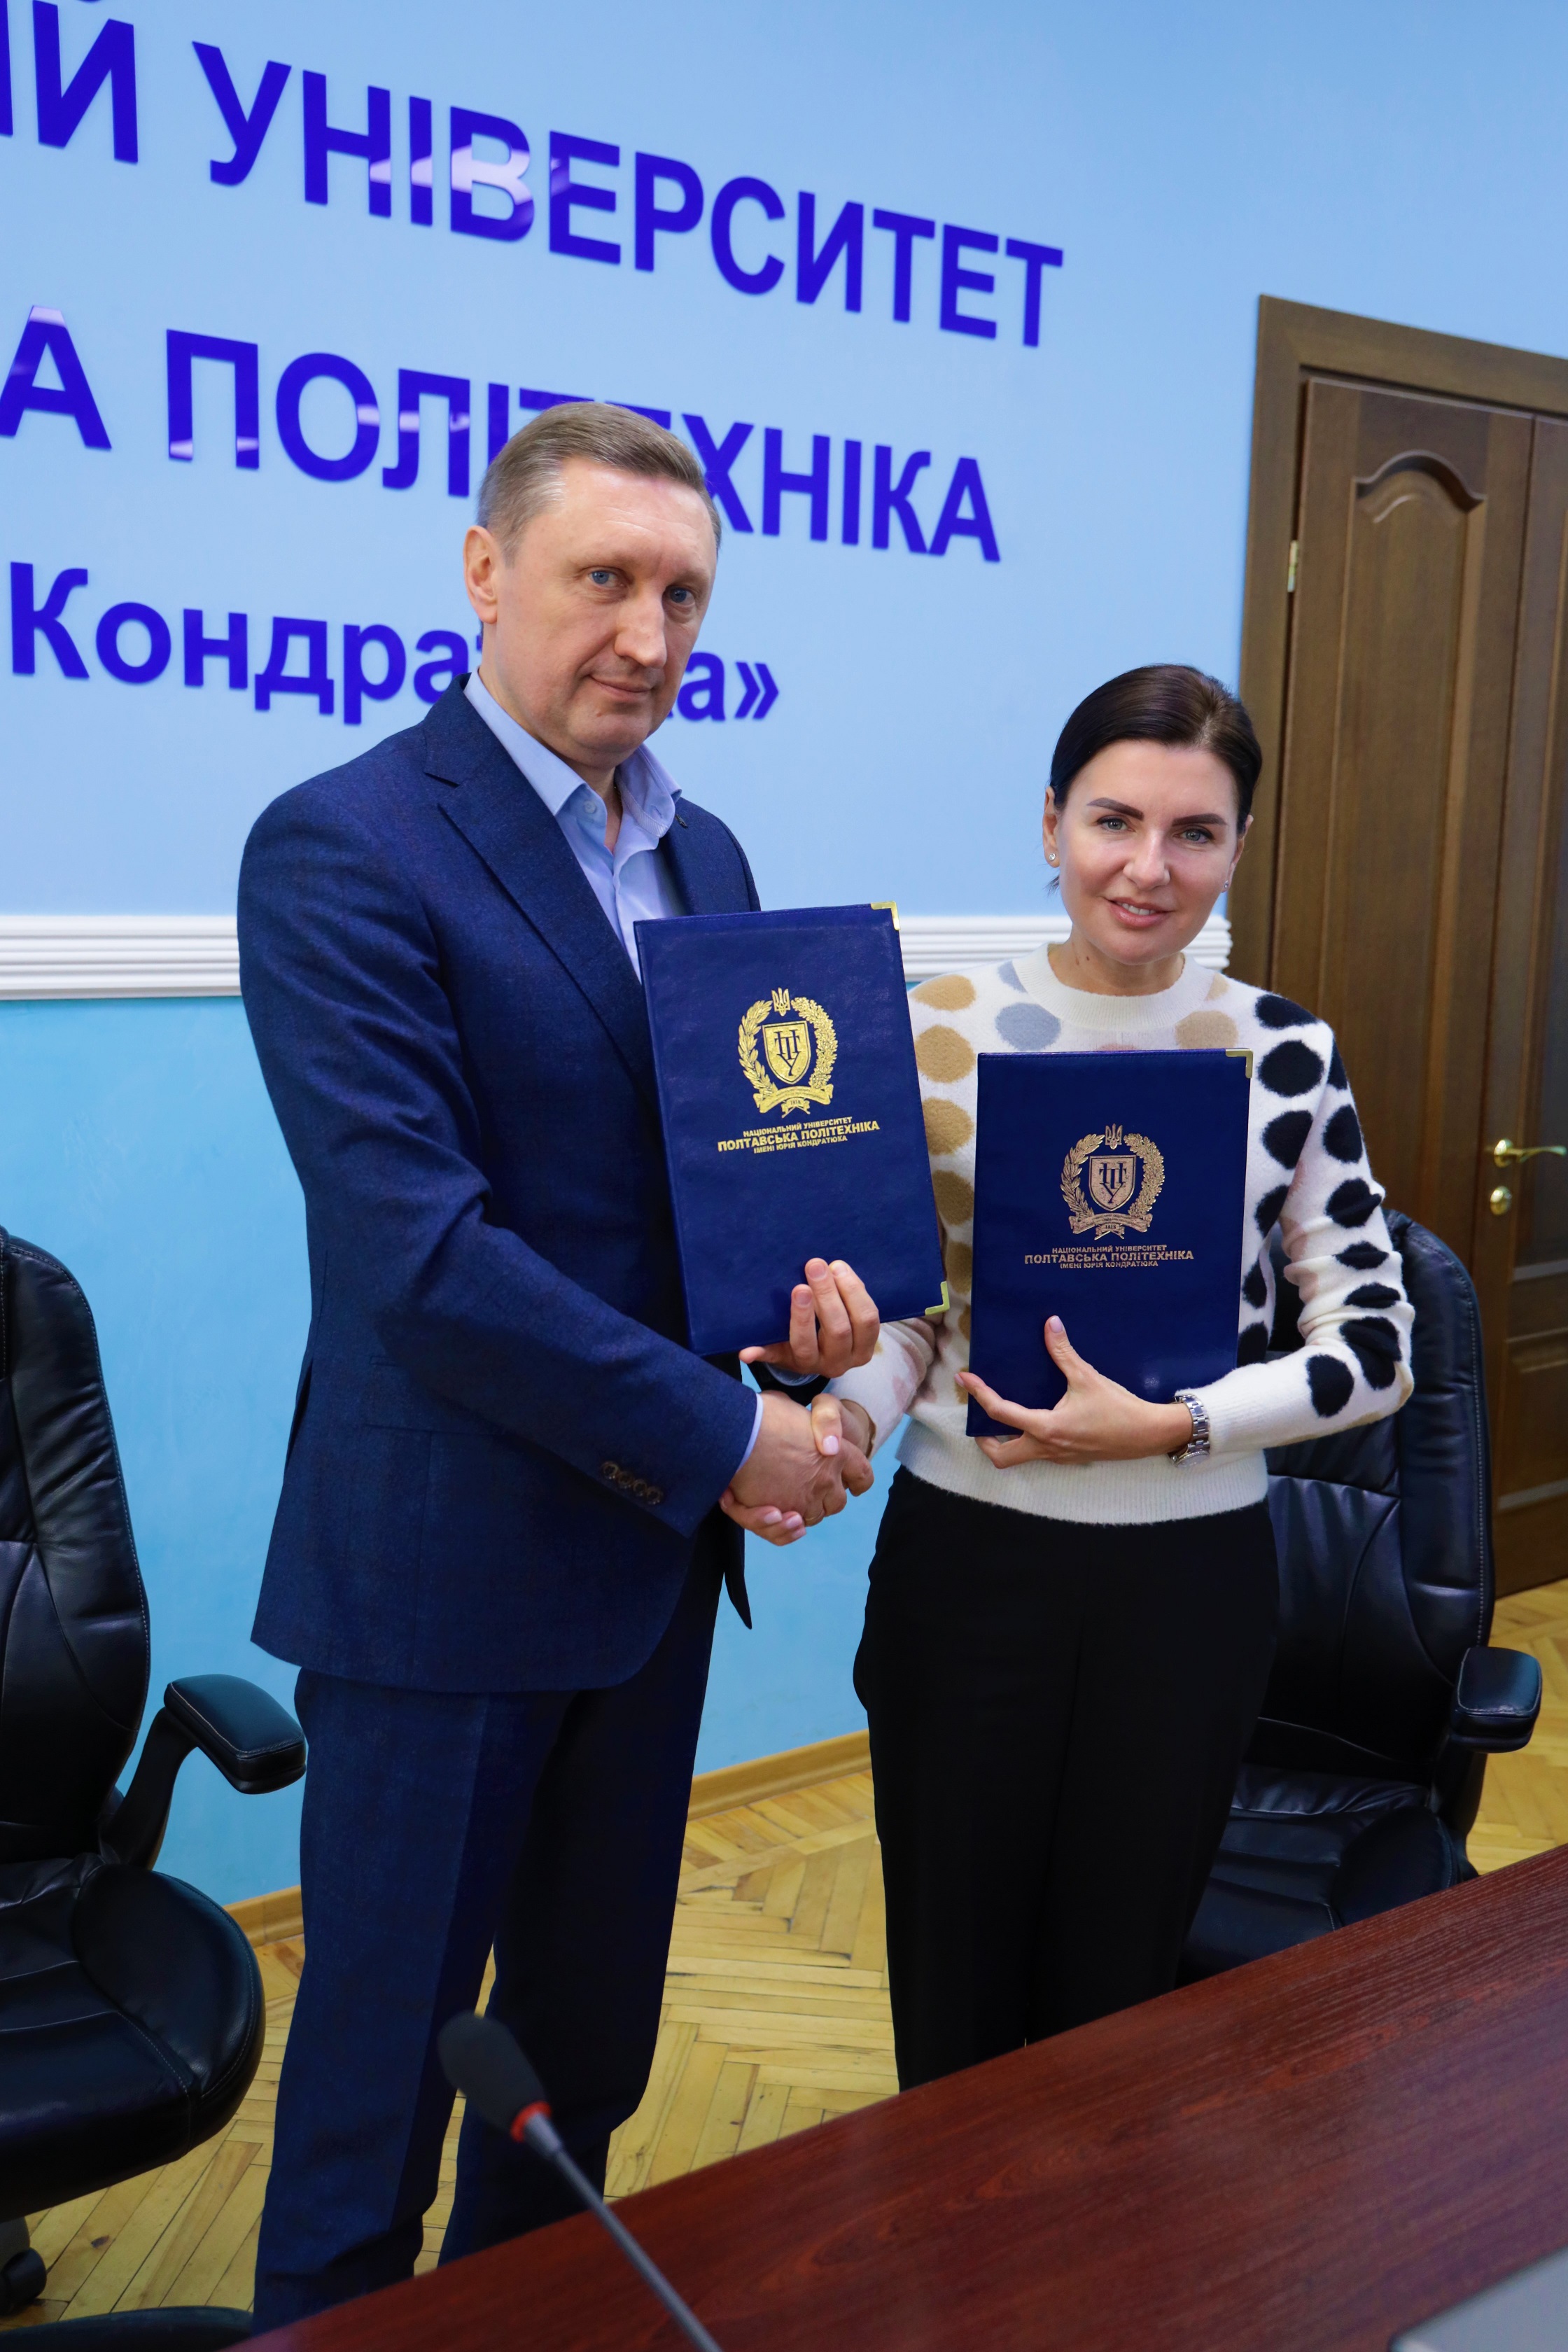 Poltava Polytechnic and Karazin University sign an agreement on cooperation under martial law